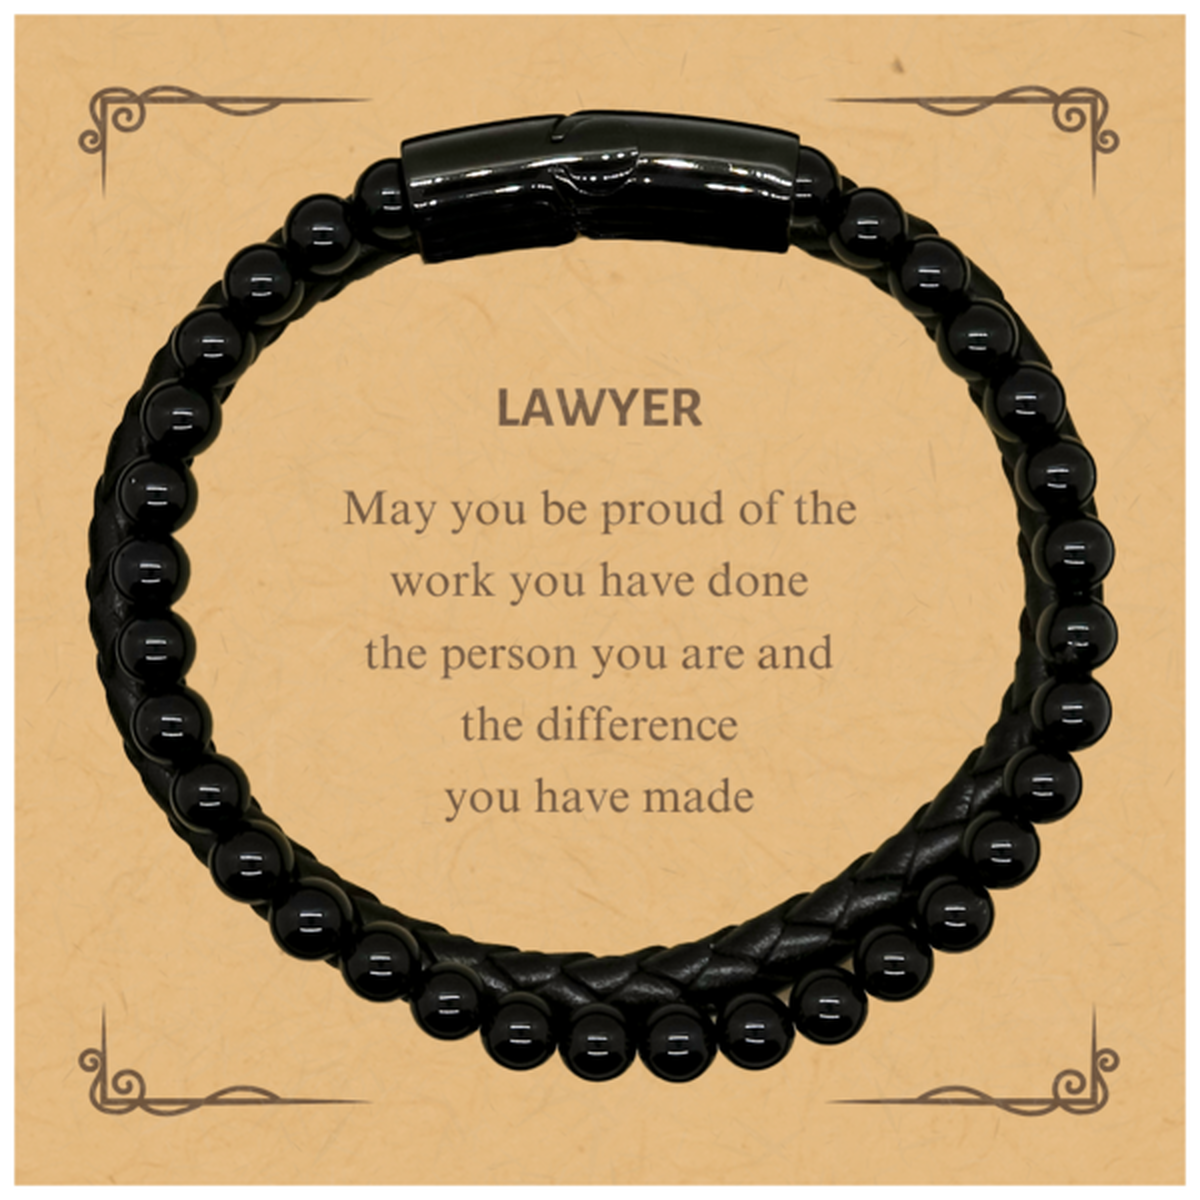 Lawyer May you be proud of the work you have done, Retirement Lawyer Stone Leather Bracelets for Colleague Appreciation Gifts Amazing for Lawyer